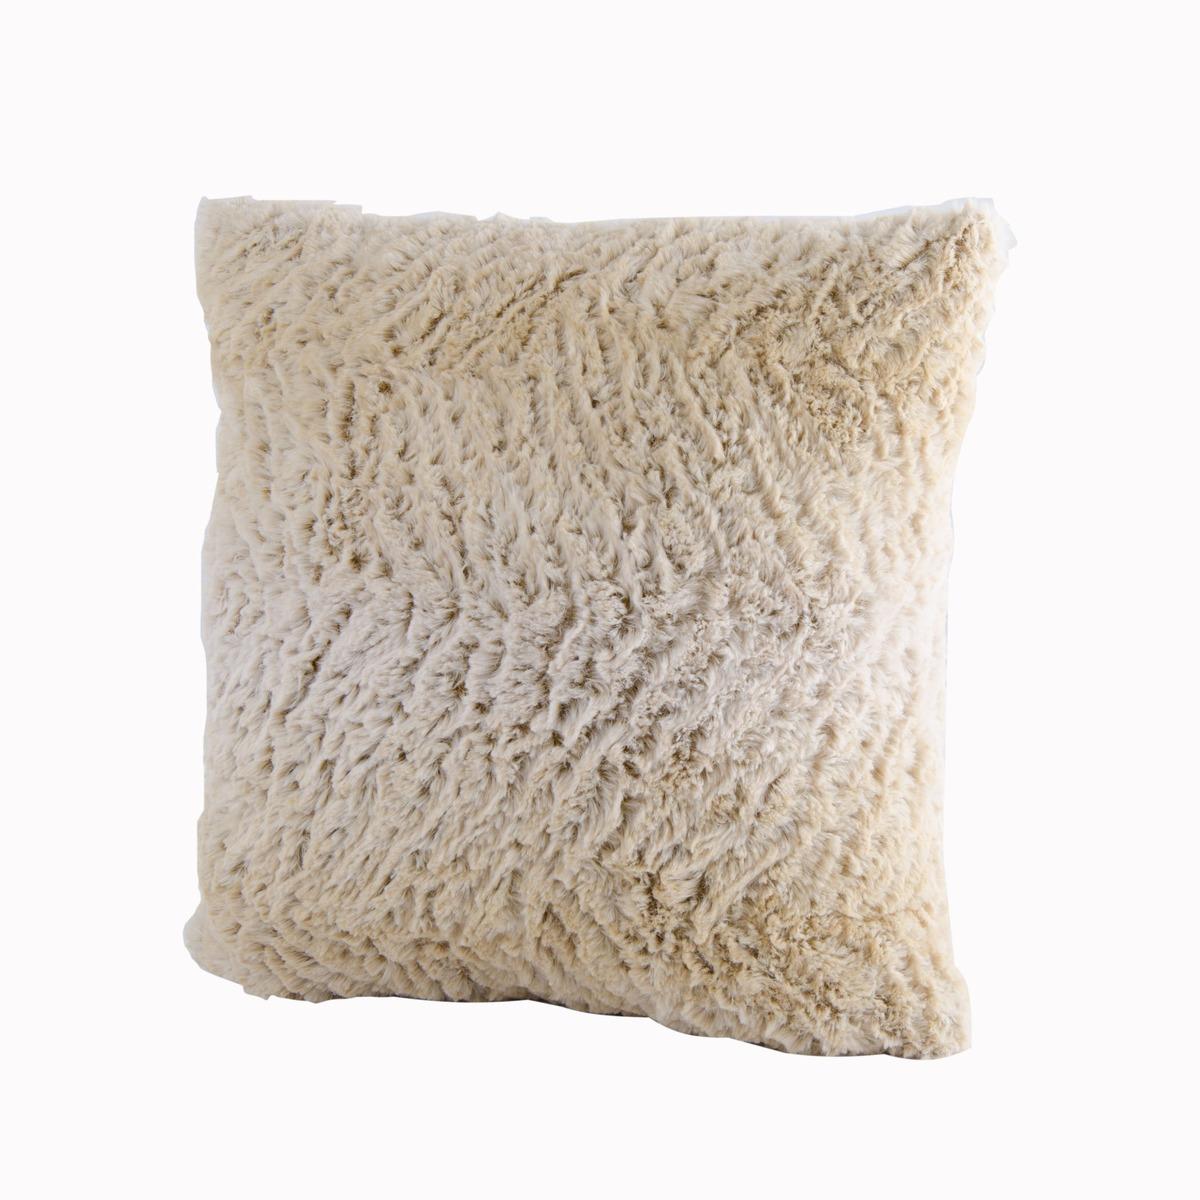 Coussin ultra doux - 40 x 40 cm - Beige taupe